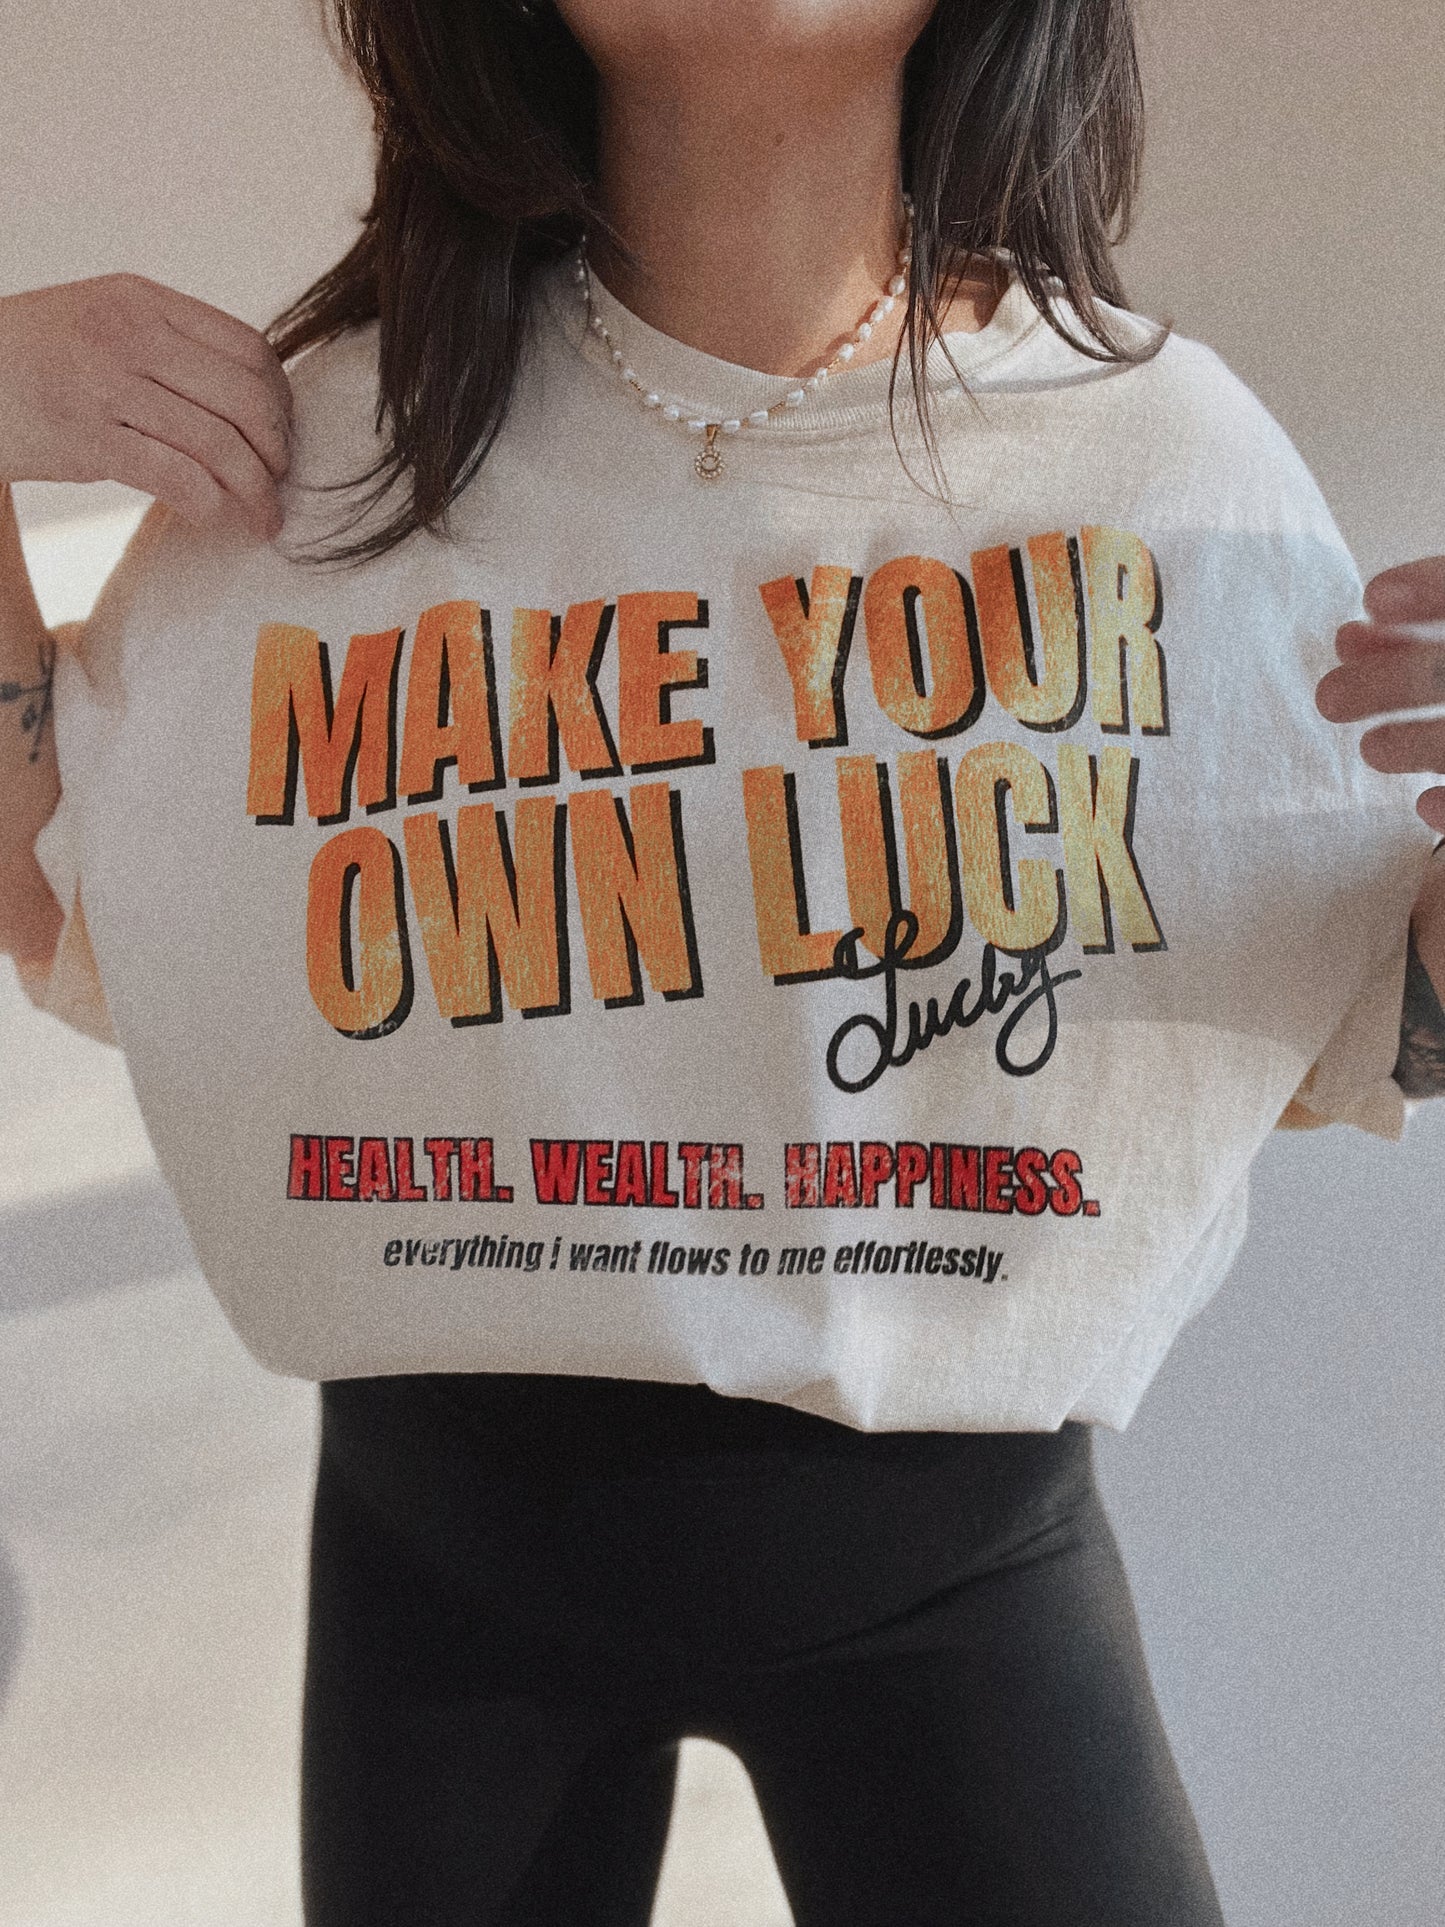 Make Your Own Luck Tee